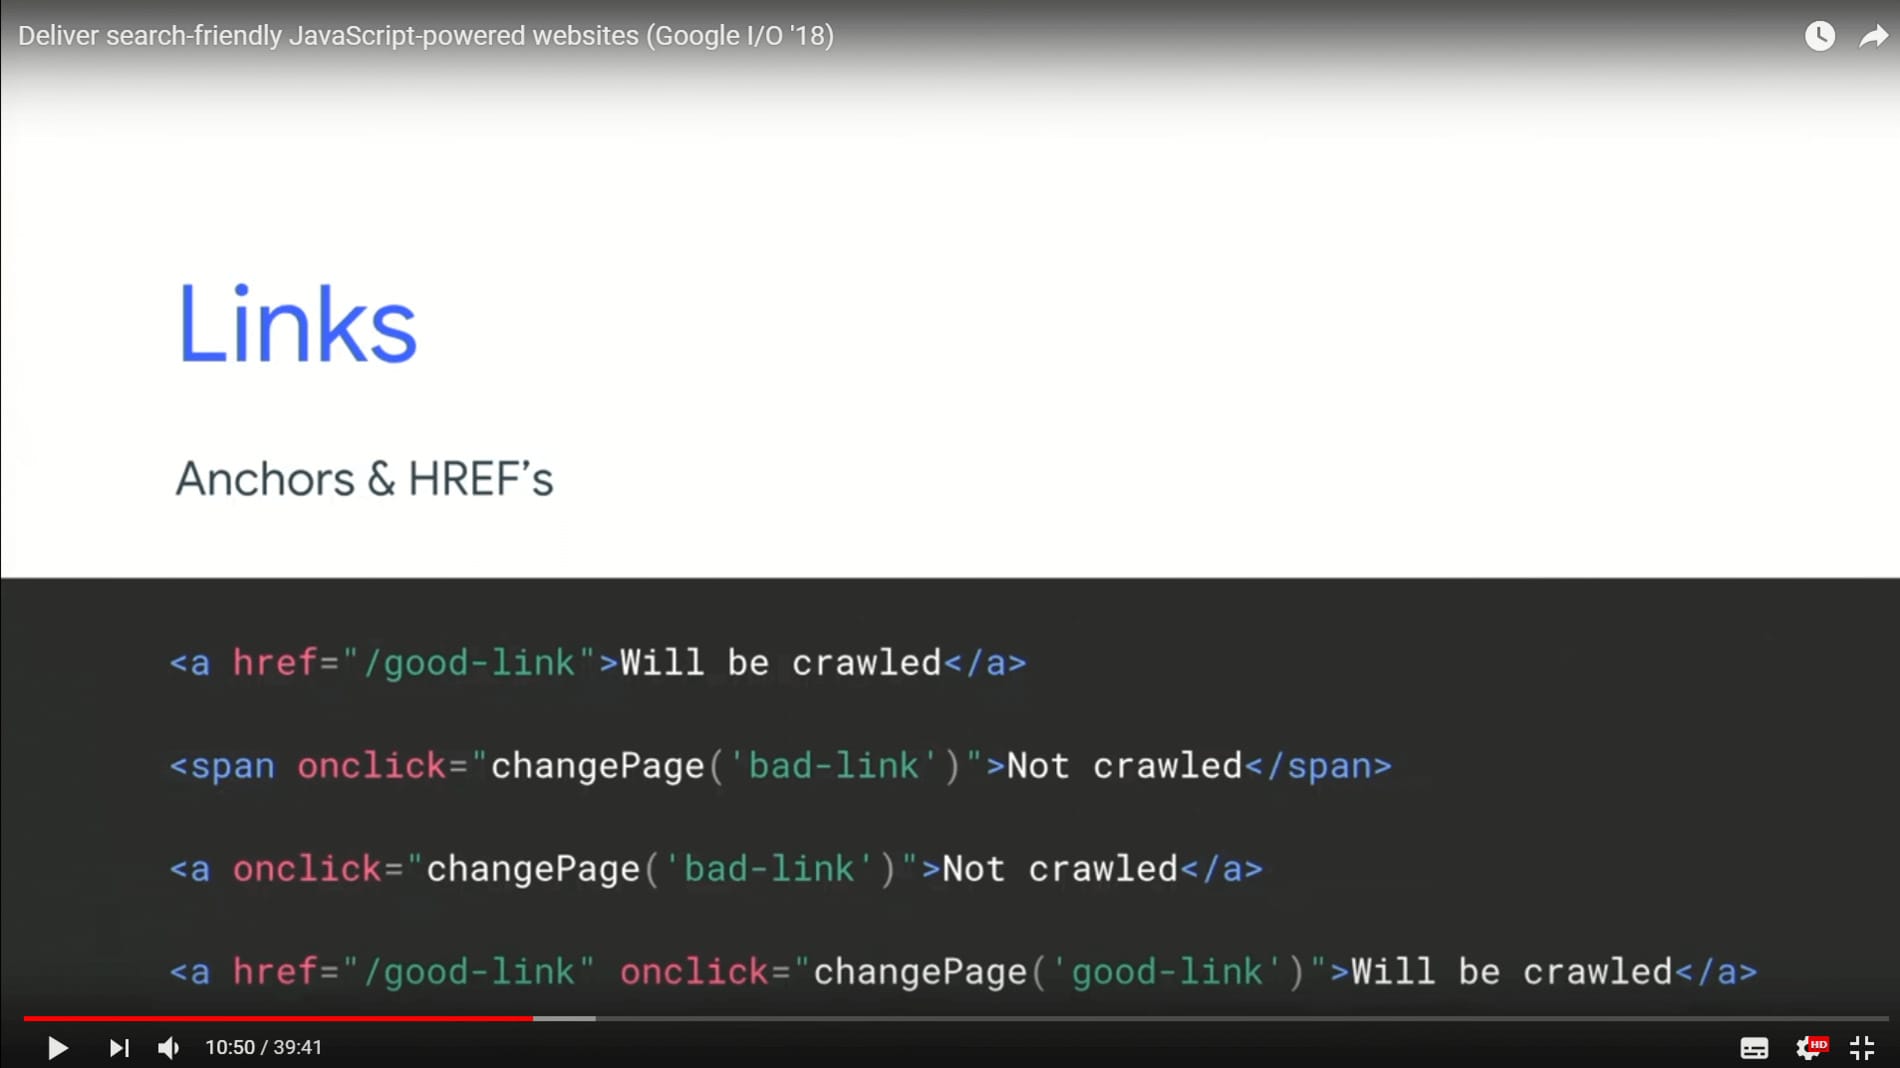 Screenshot from the Google I/O conference in 2018 about Anchors links & HREF links 